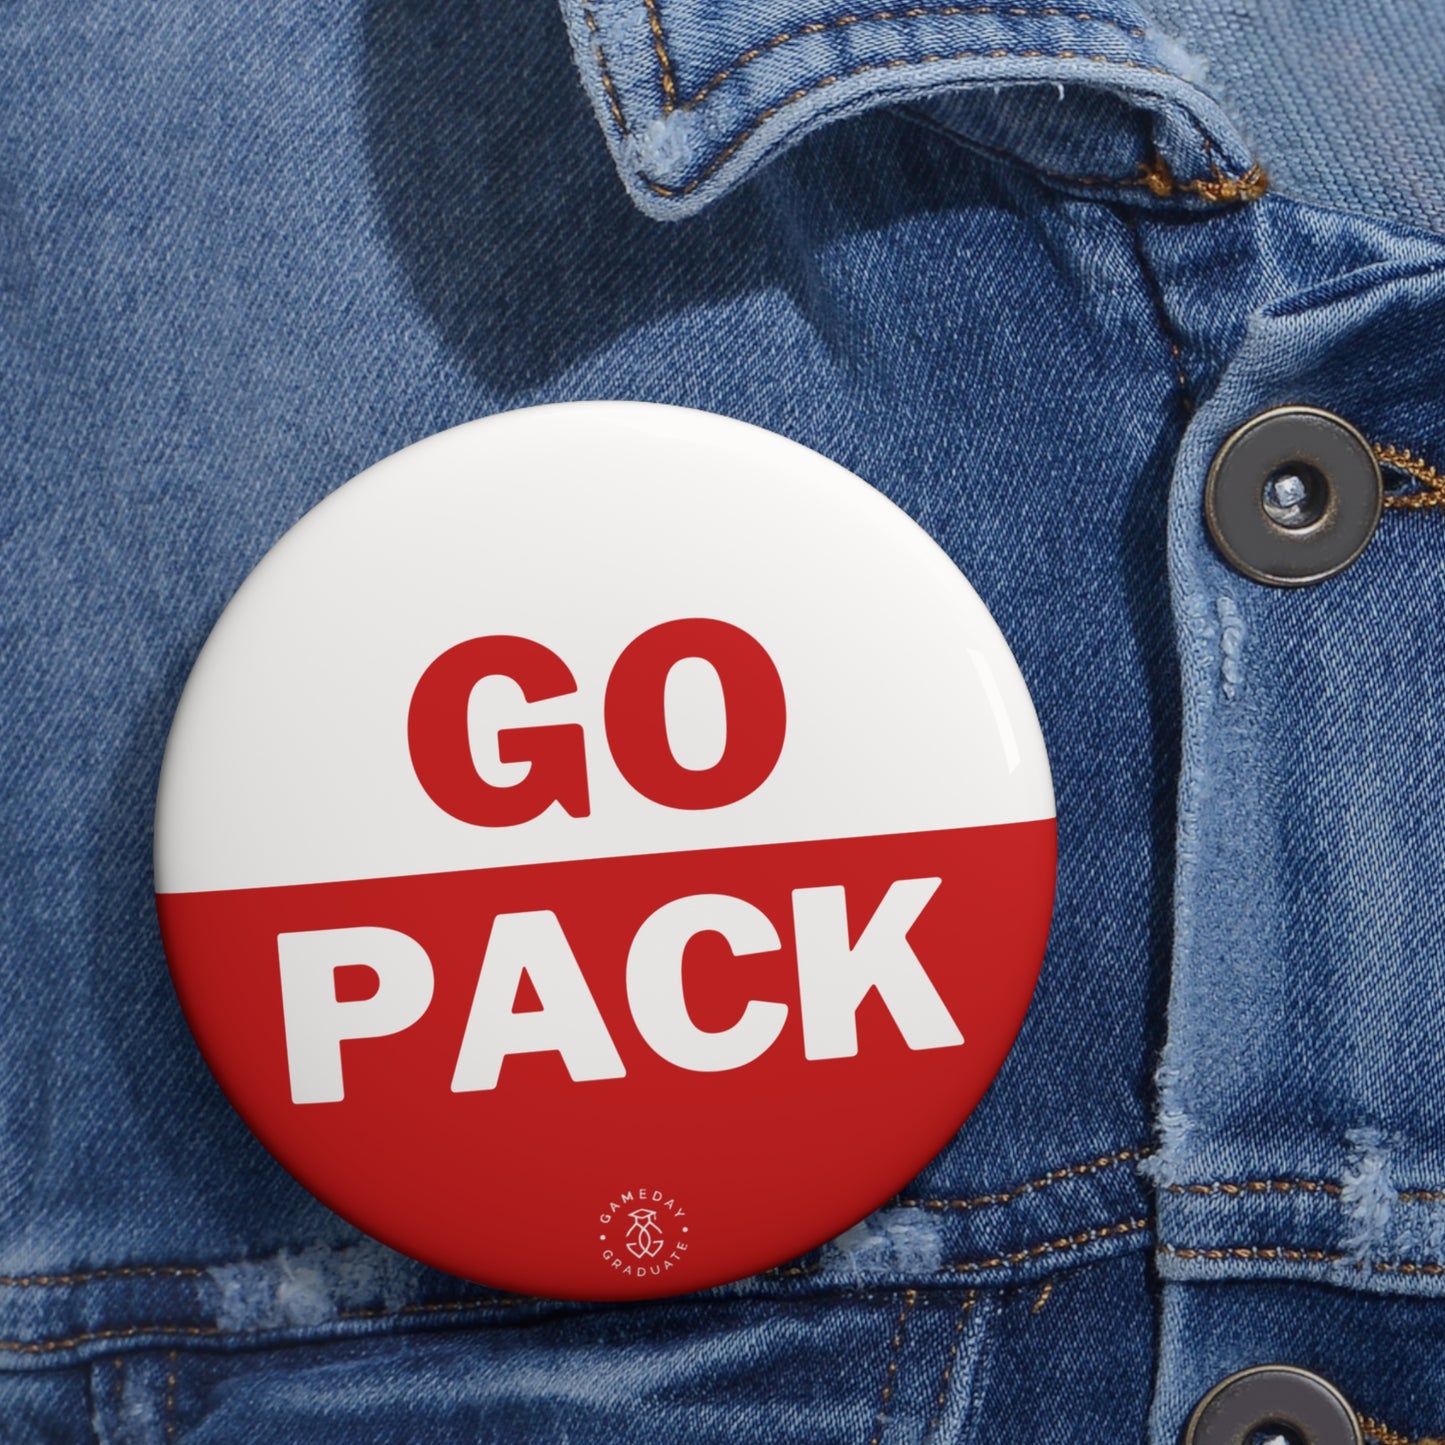 NC State Go Pack Button